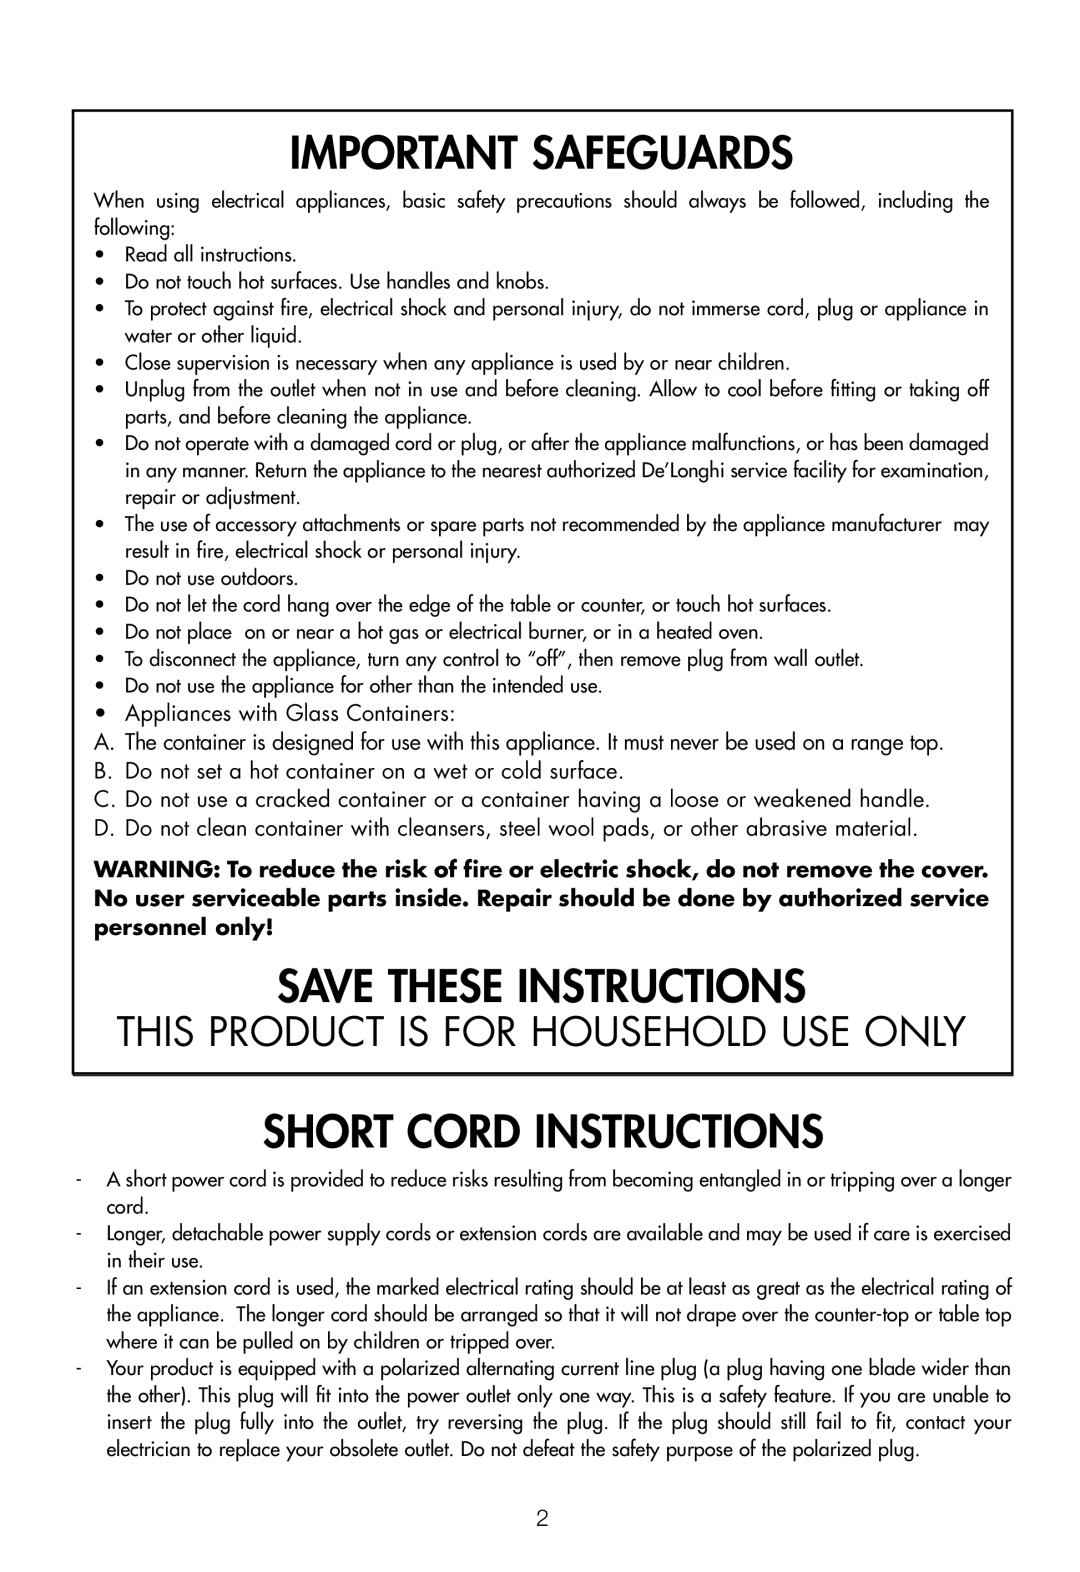 DeLonghi EC460 instruction manual Important Safeguards, Save These Instructions, Short Cord Instructions 